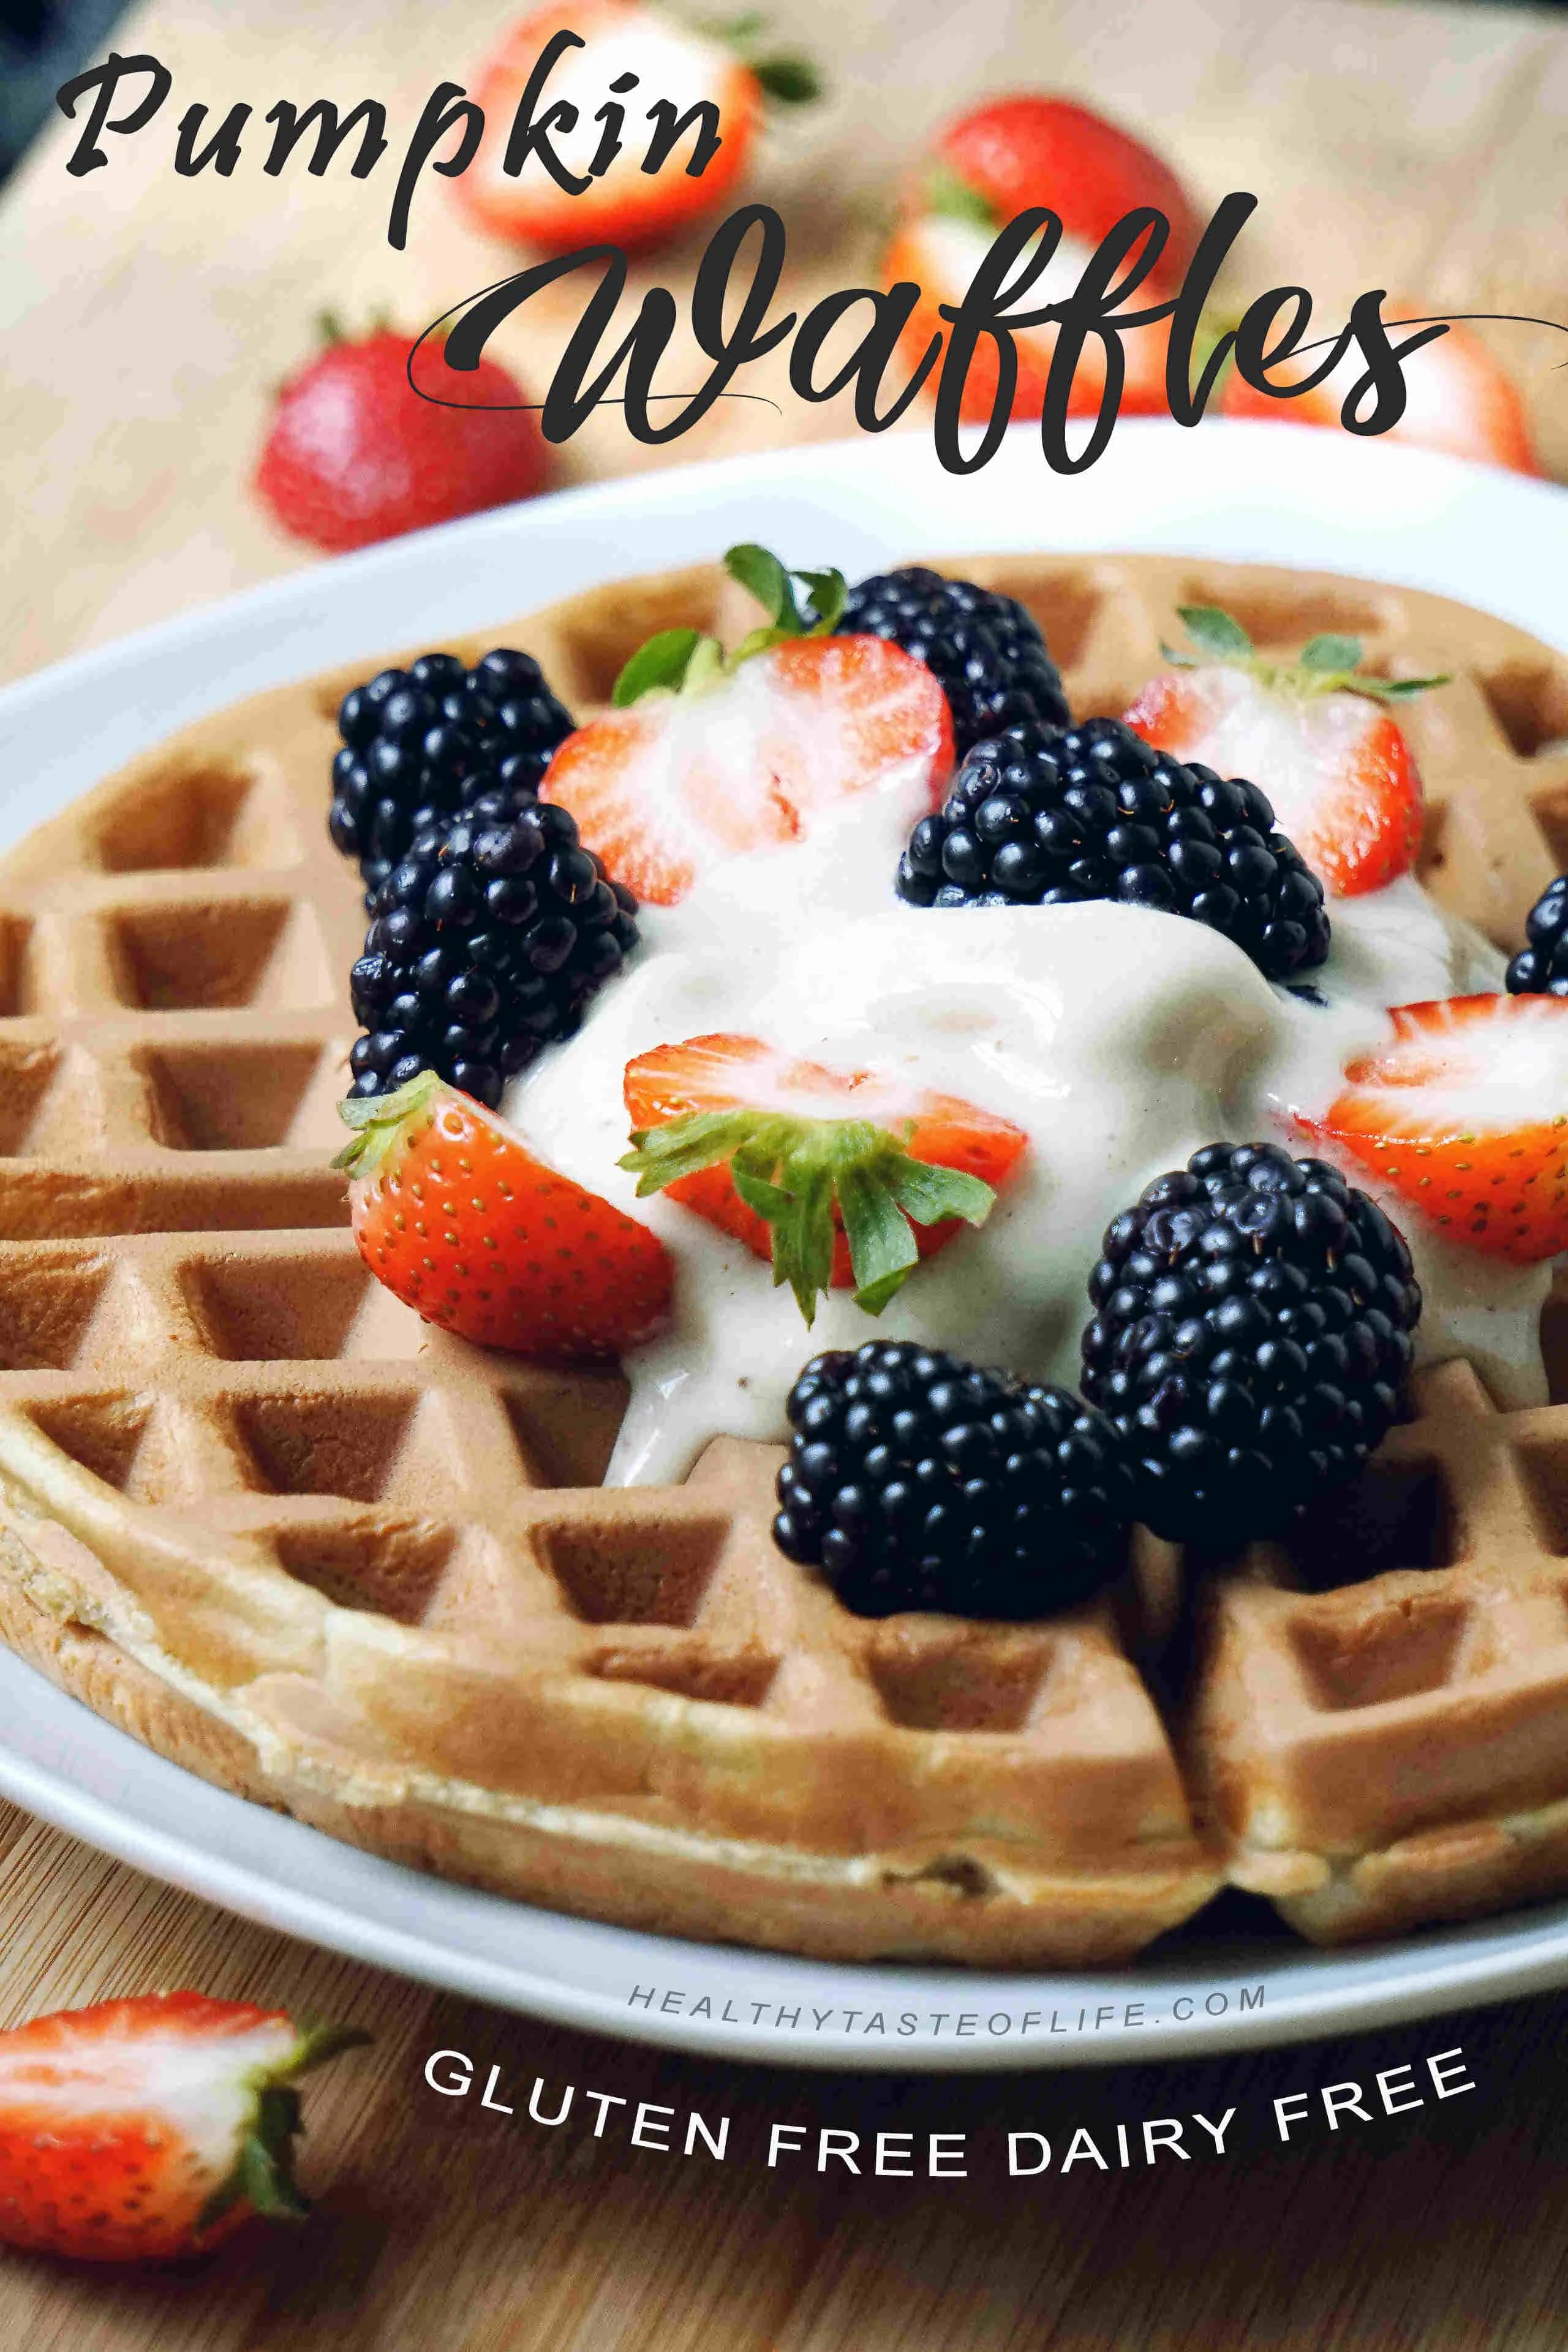 Learn how to make healthy homemade, gluten free pumpkin waffles with clean ingredients. This pumpkin waffles recipe is easy to make, its dairy free, gluten free, sugar free - perfect for a healthy breakfast or brunch.